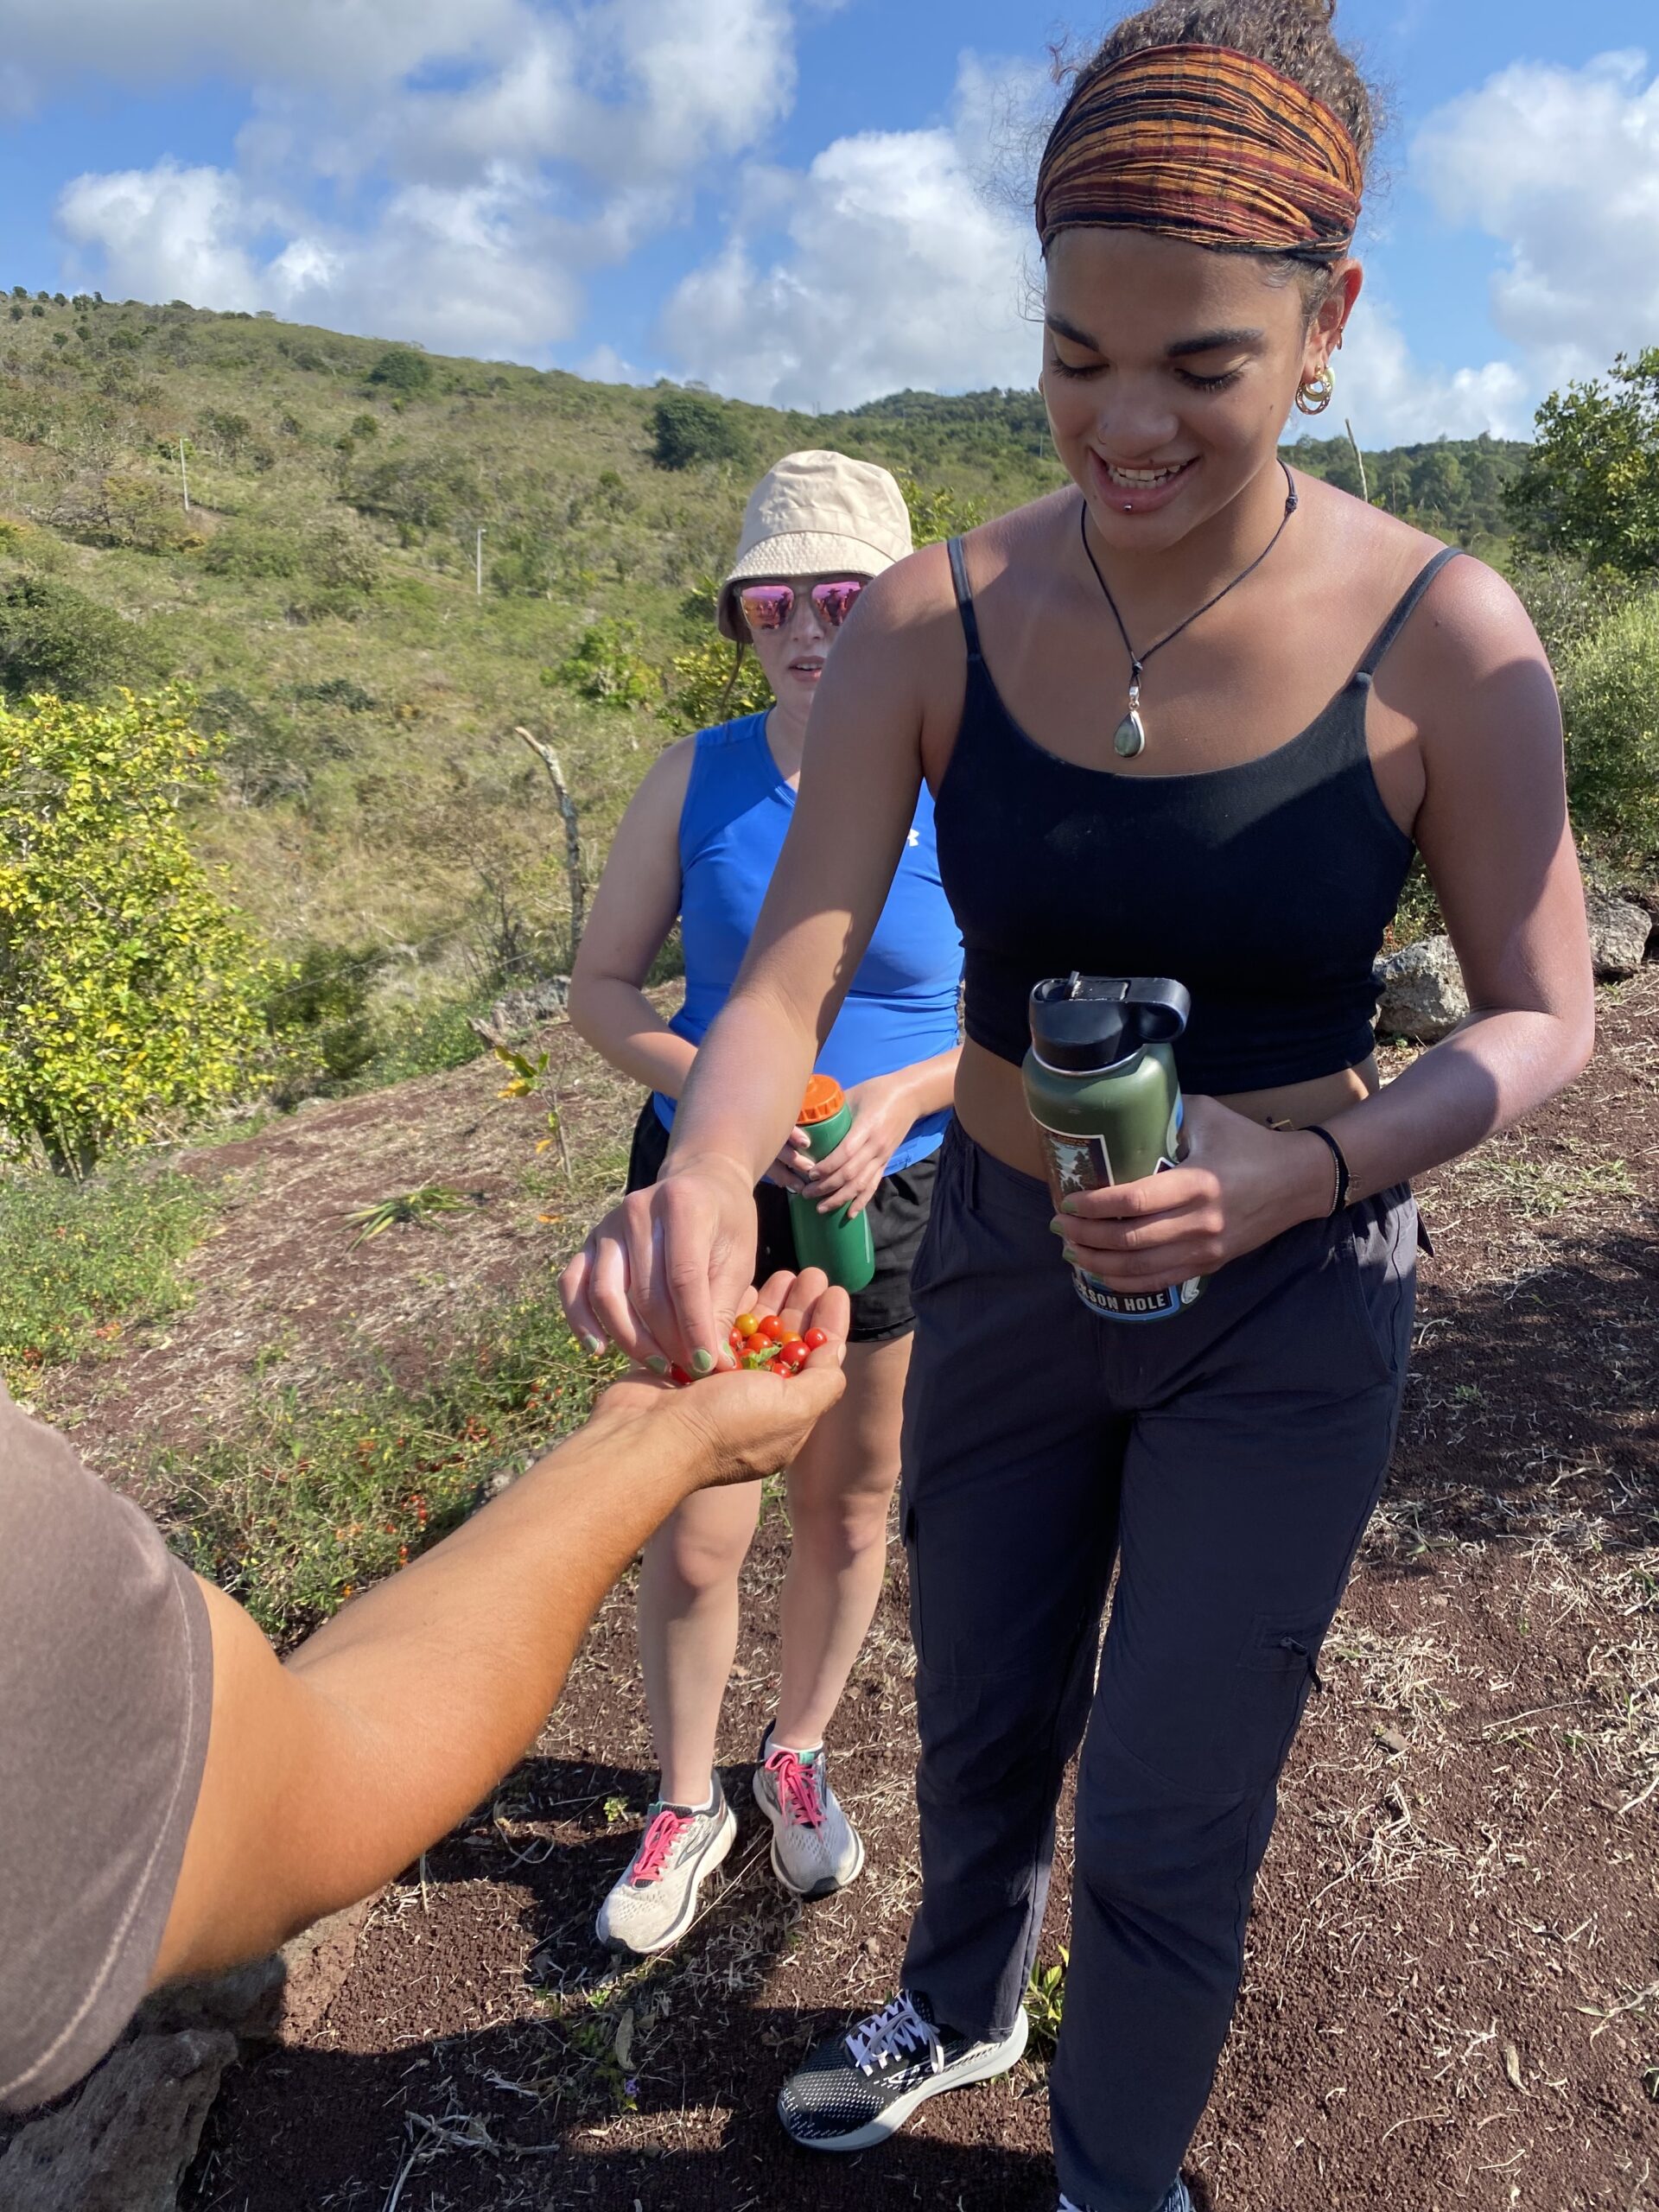 AIFS Abroad students visiting a sustainable and organic farm in Galápagos Islands, Ecuador for program's environmental Green Initiative while studying abroad